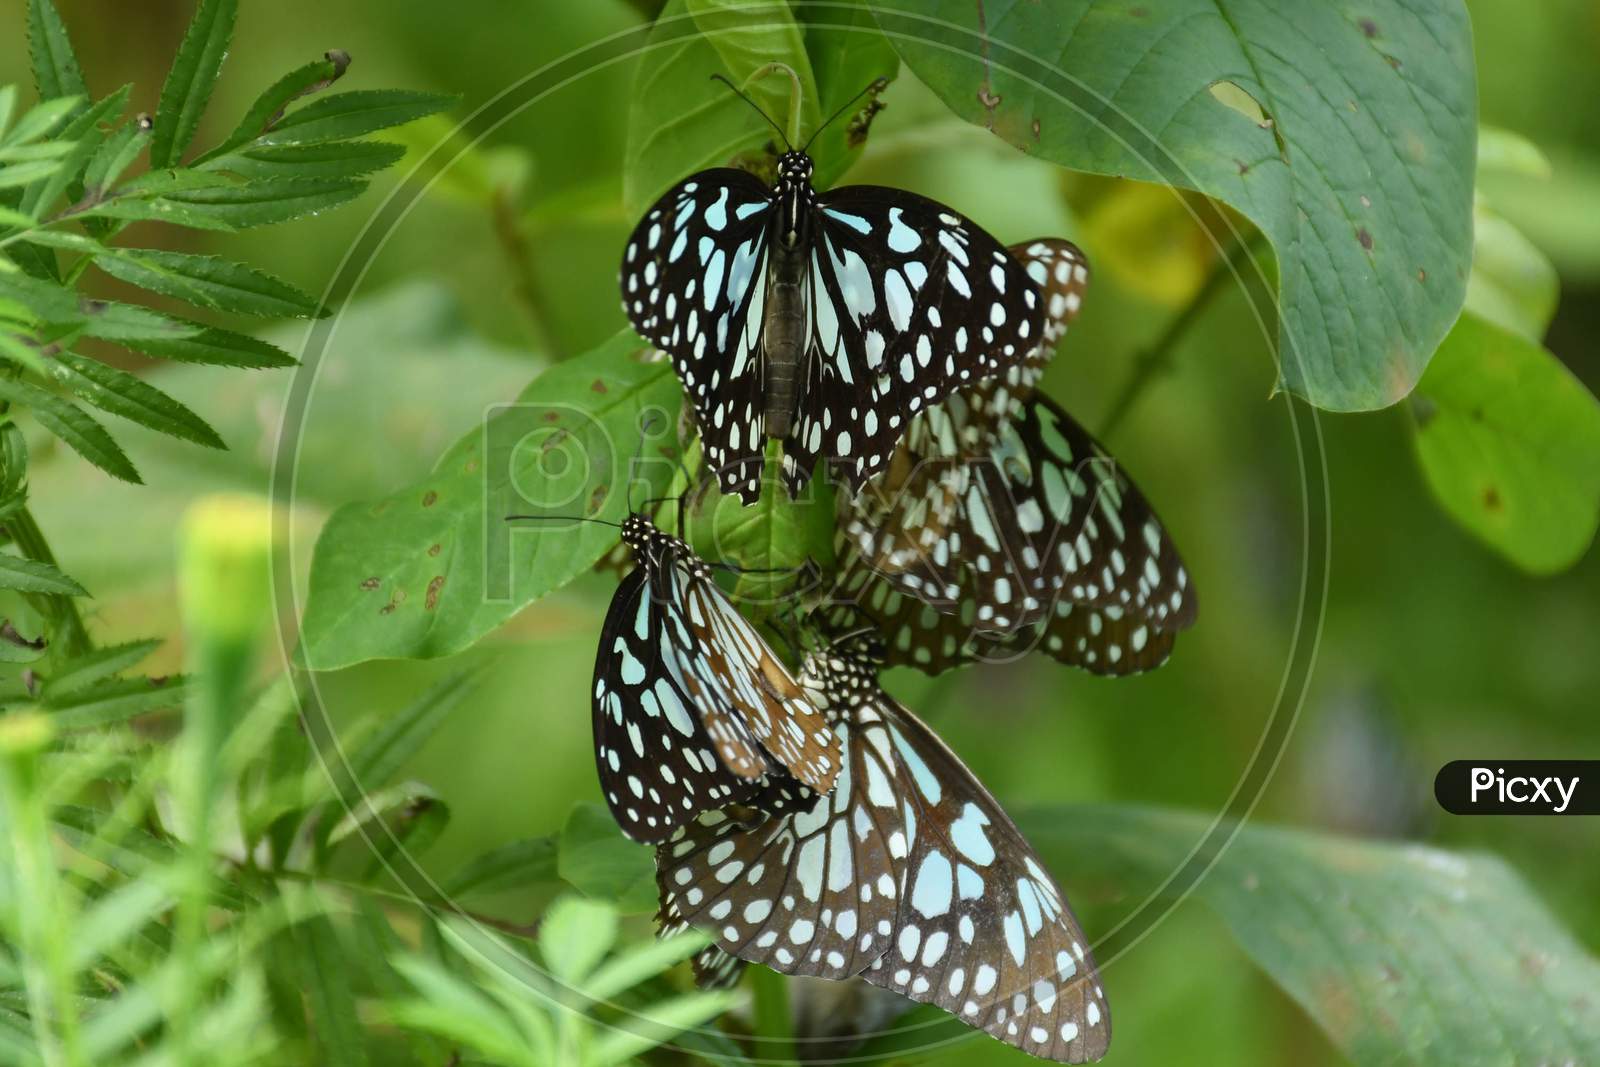 Blue Tiger (Tirumala limniace) are pictured at a park near Koliabor in Nagaon District of Assam on Oct 31,2020.